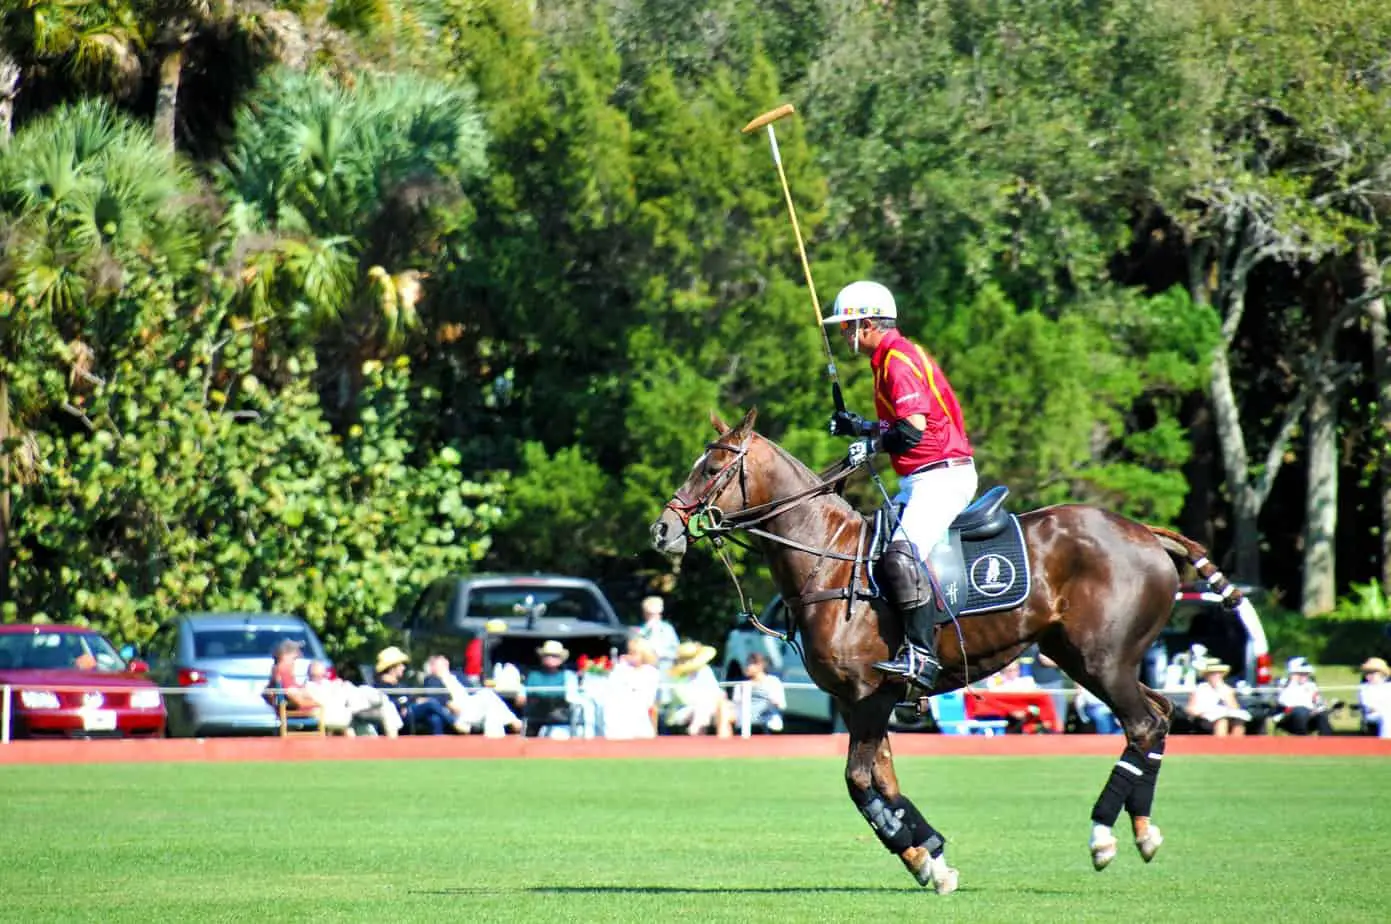 Can You Play Polo If You’re Left Handed?